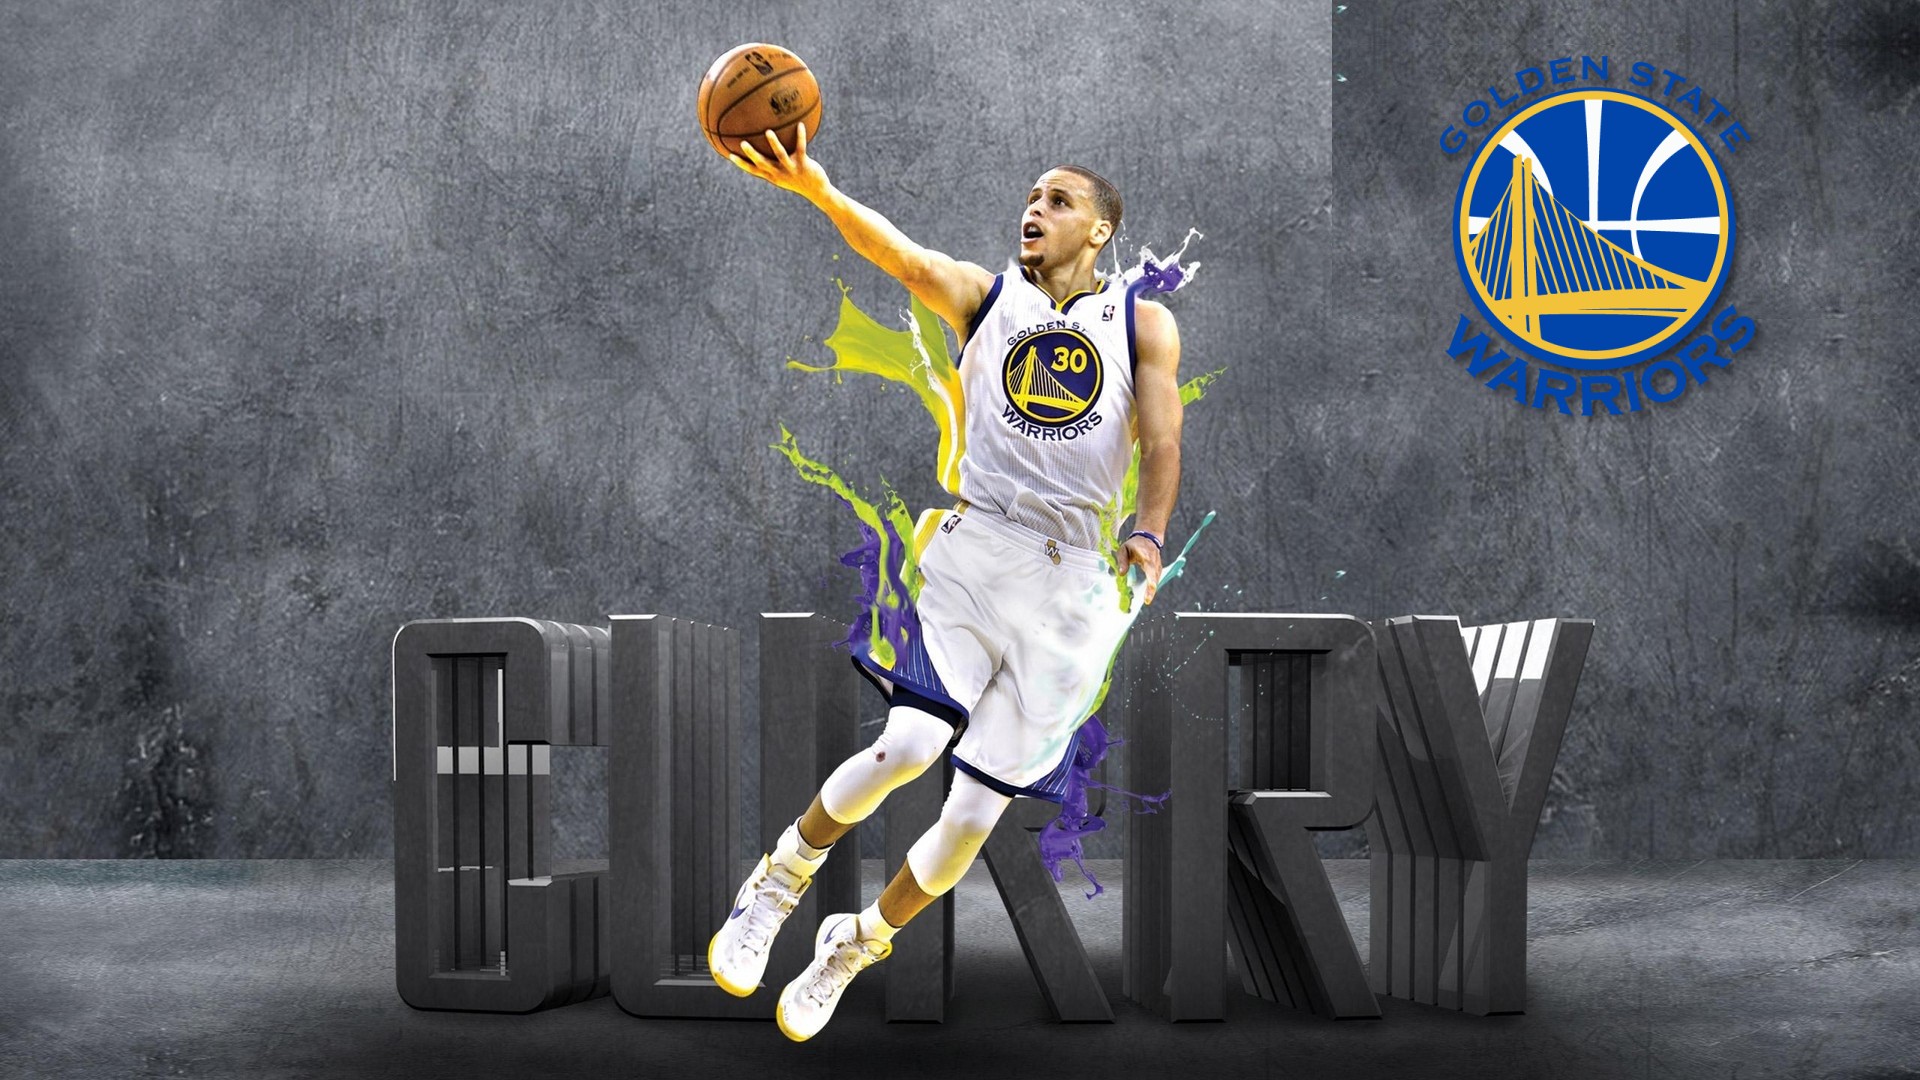 Curry Desktop Wallpapers with image dimensions 1920x1080 pixel. You can make this wallpaper for your Desktop Computer Backgrounds, Windows or Mac Screensavers, iPhone Lock screen, Tablet or Android and another Mobile Phone device